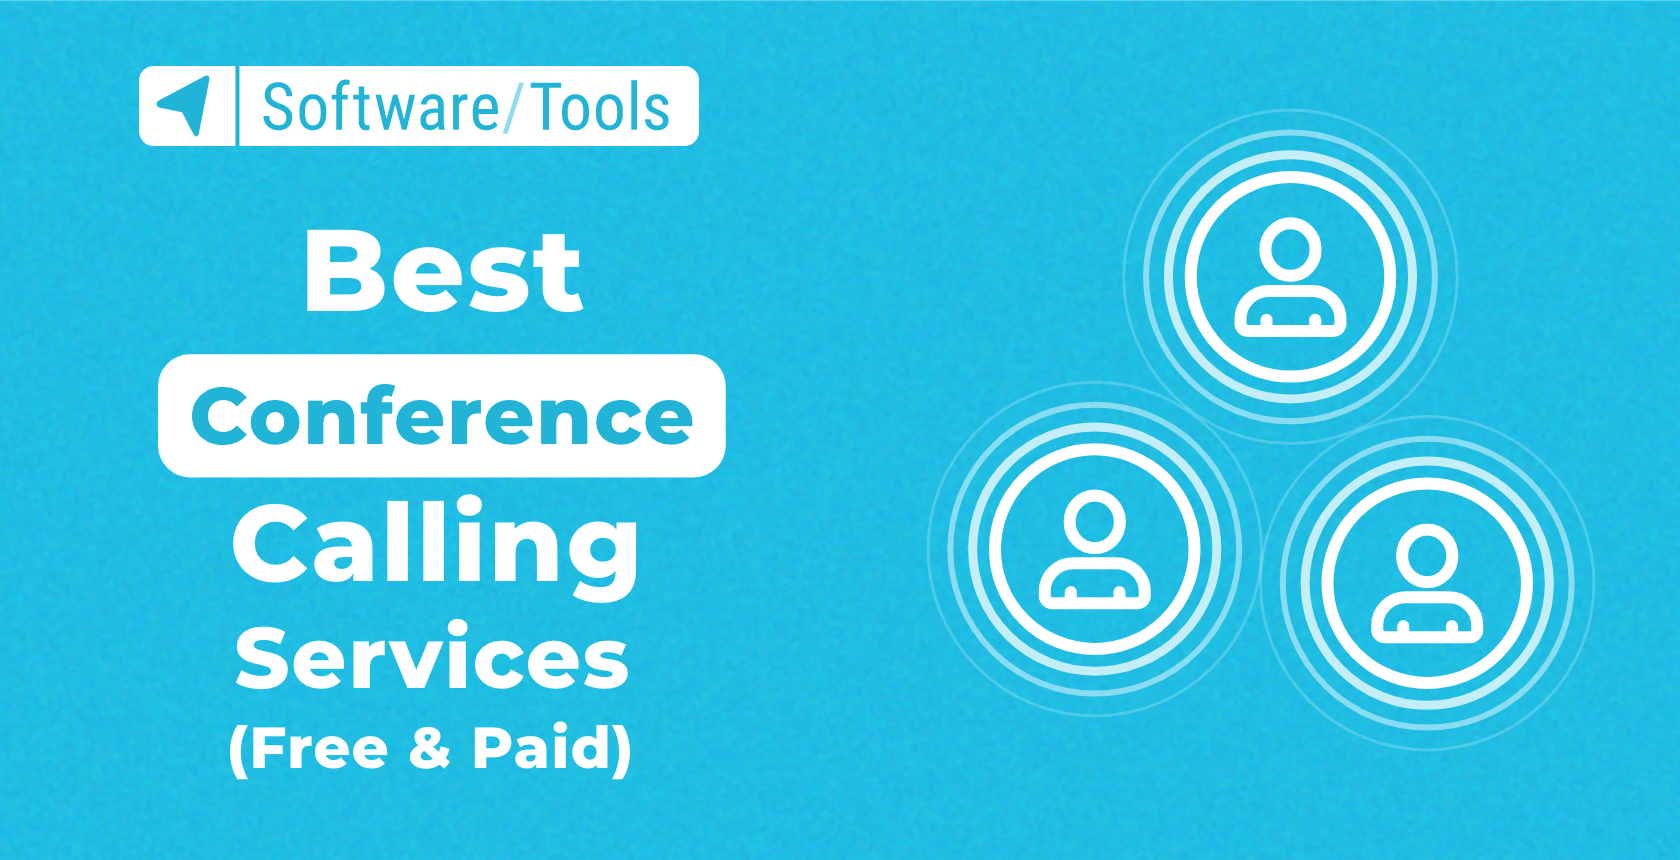 The Best Conference Calling Services (Free & Paid) for 2022